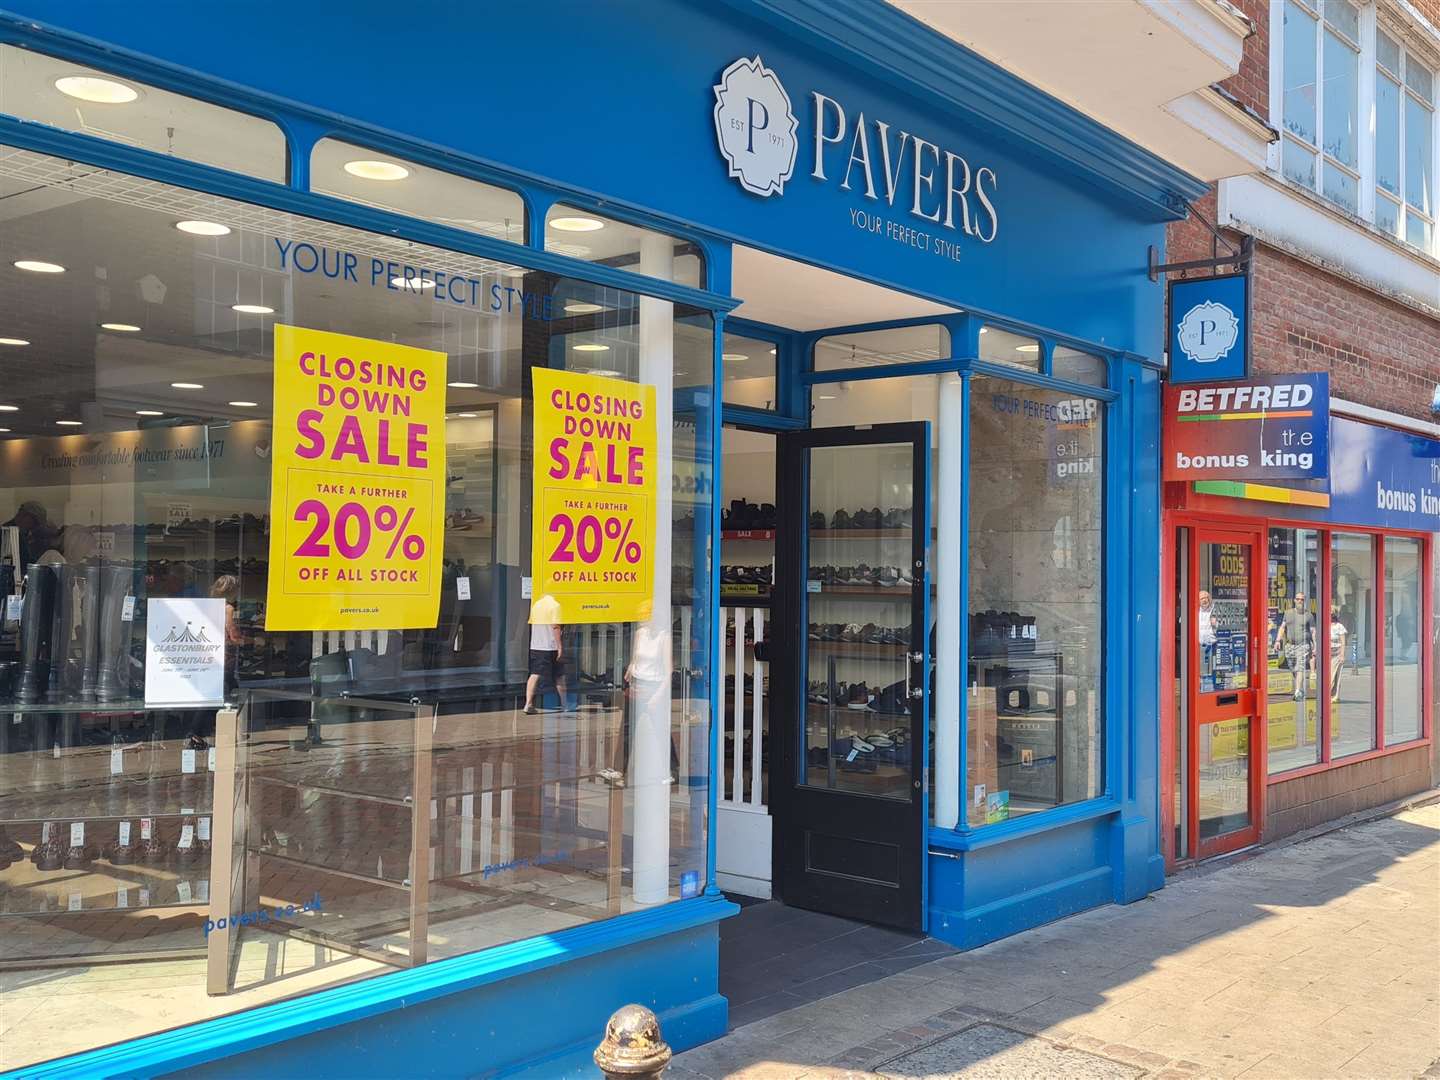 Closing down sale signs have gone up at Pavers in Canterbury